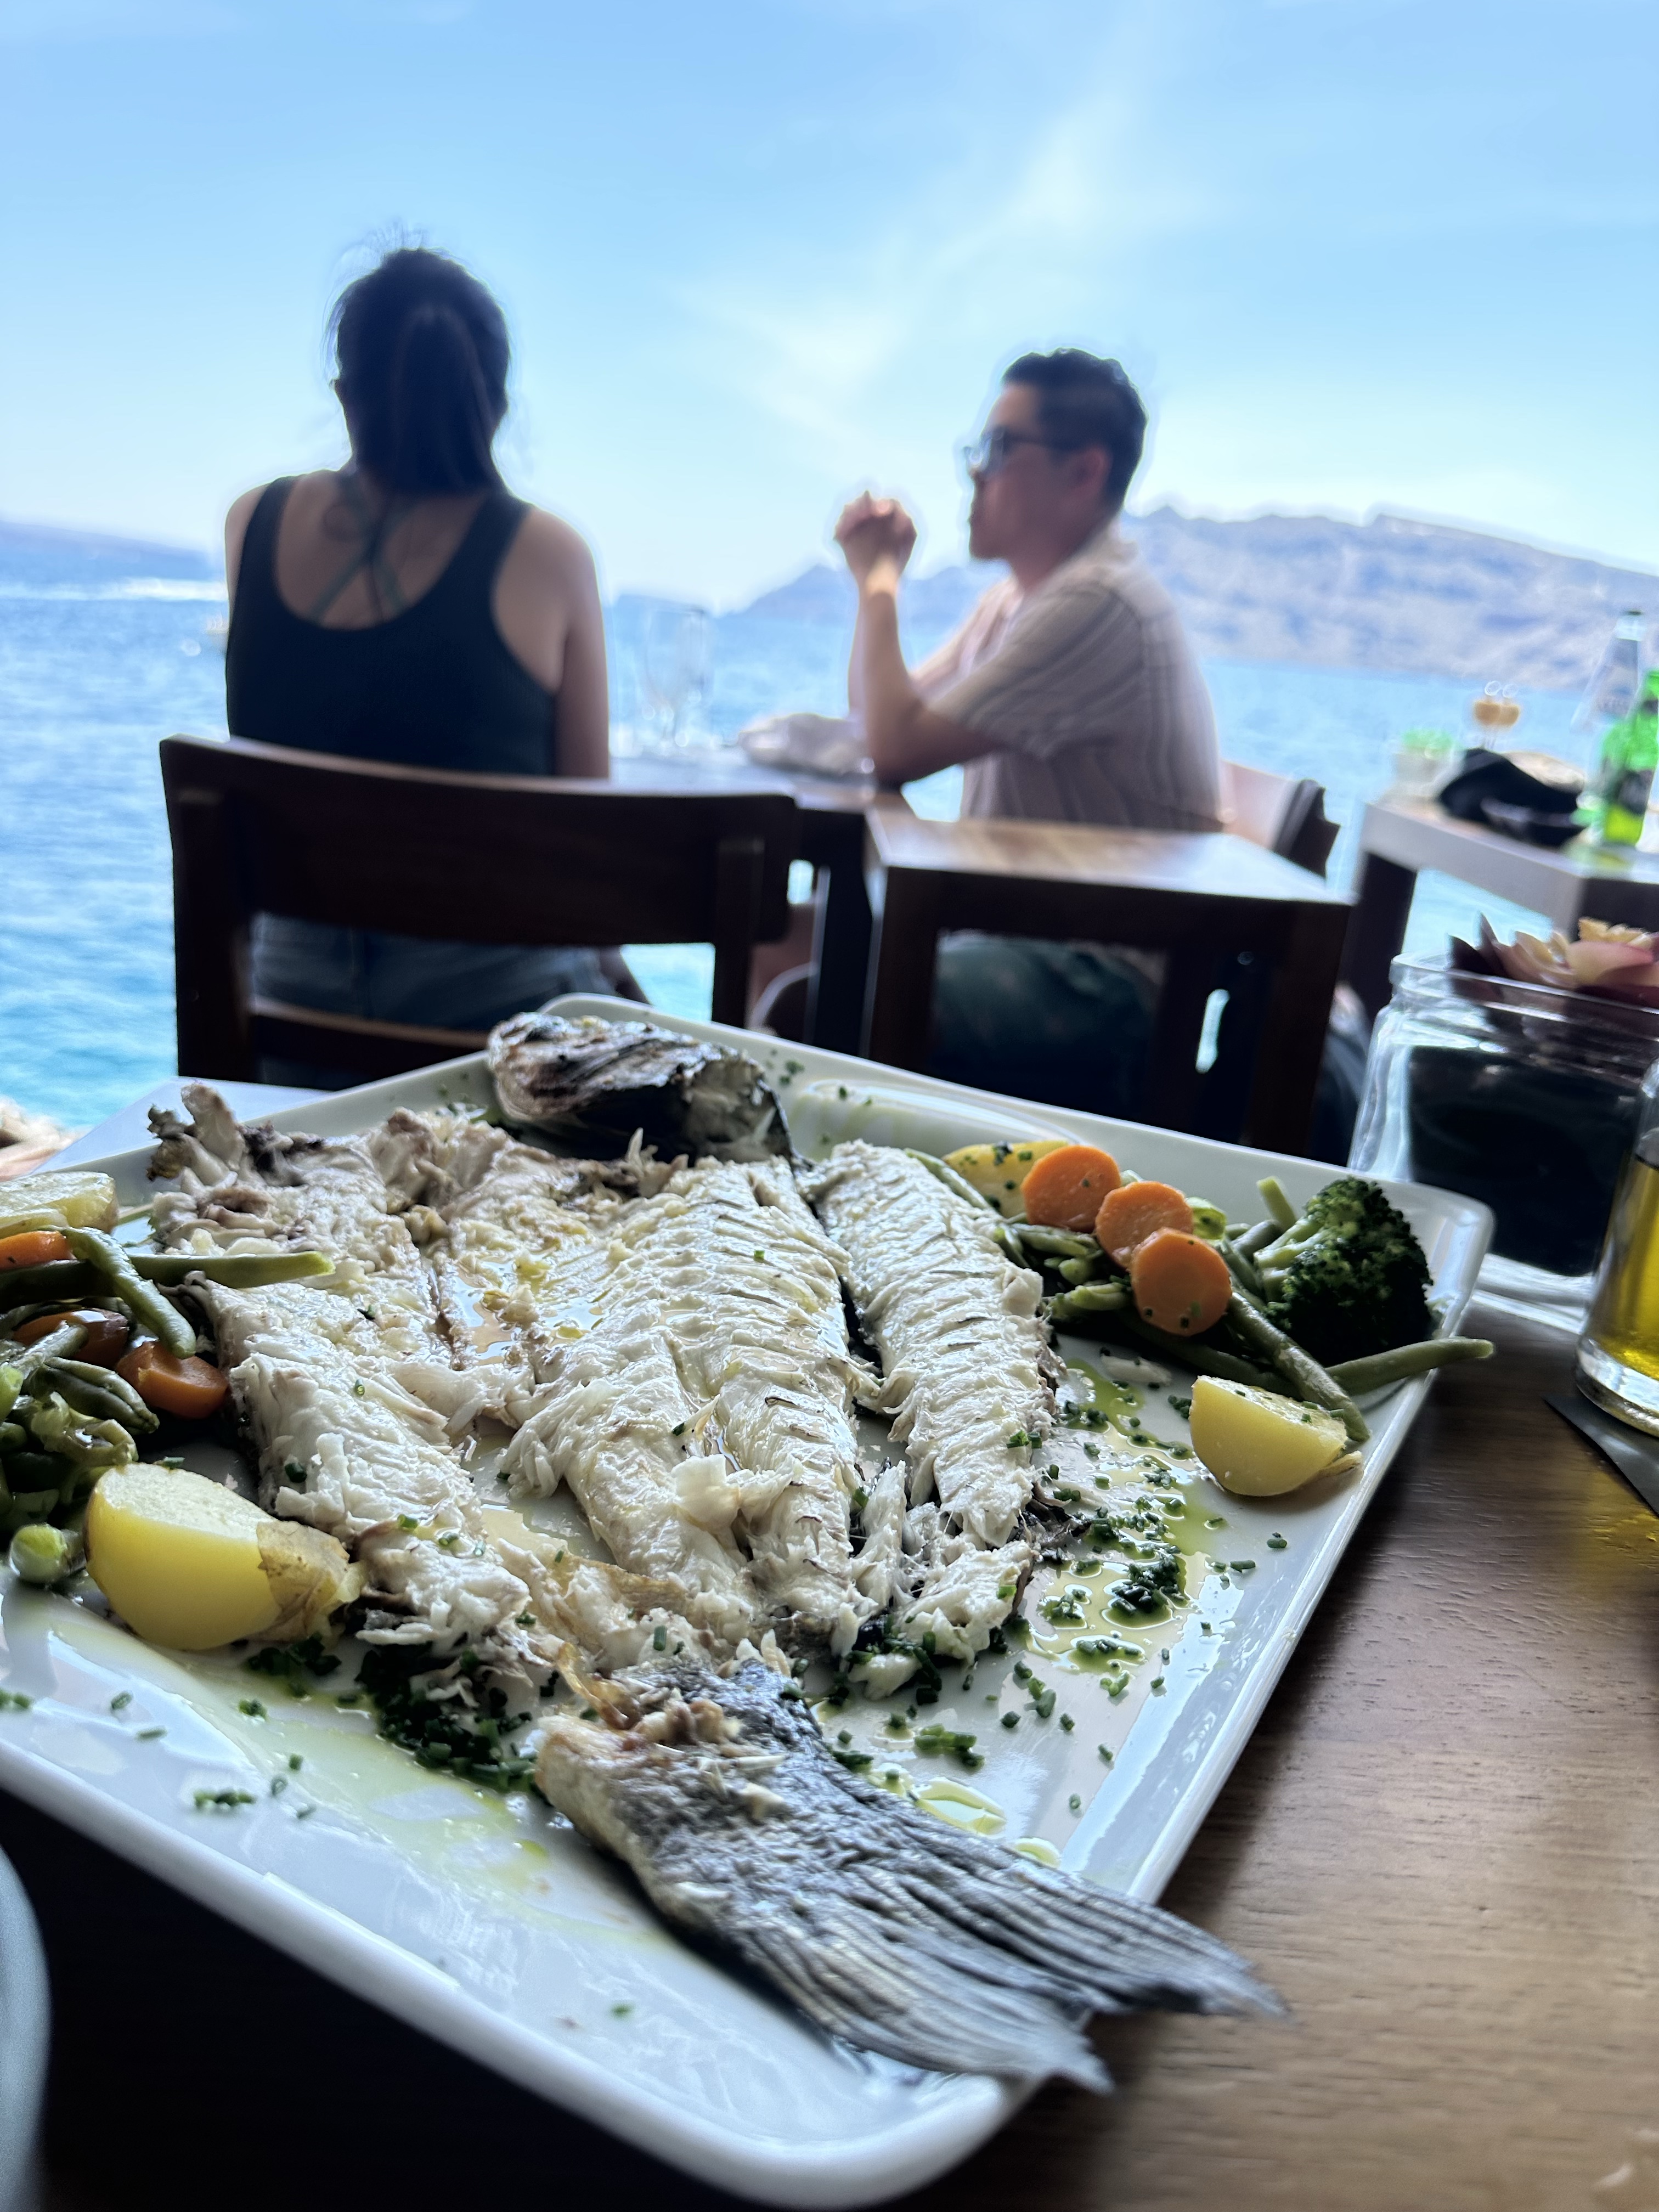 Recreating How They Eat Fish in Greece!